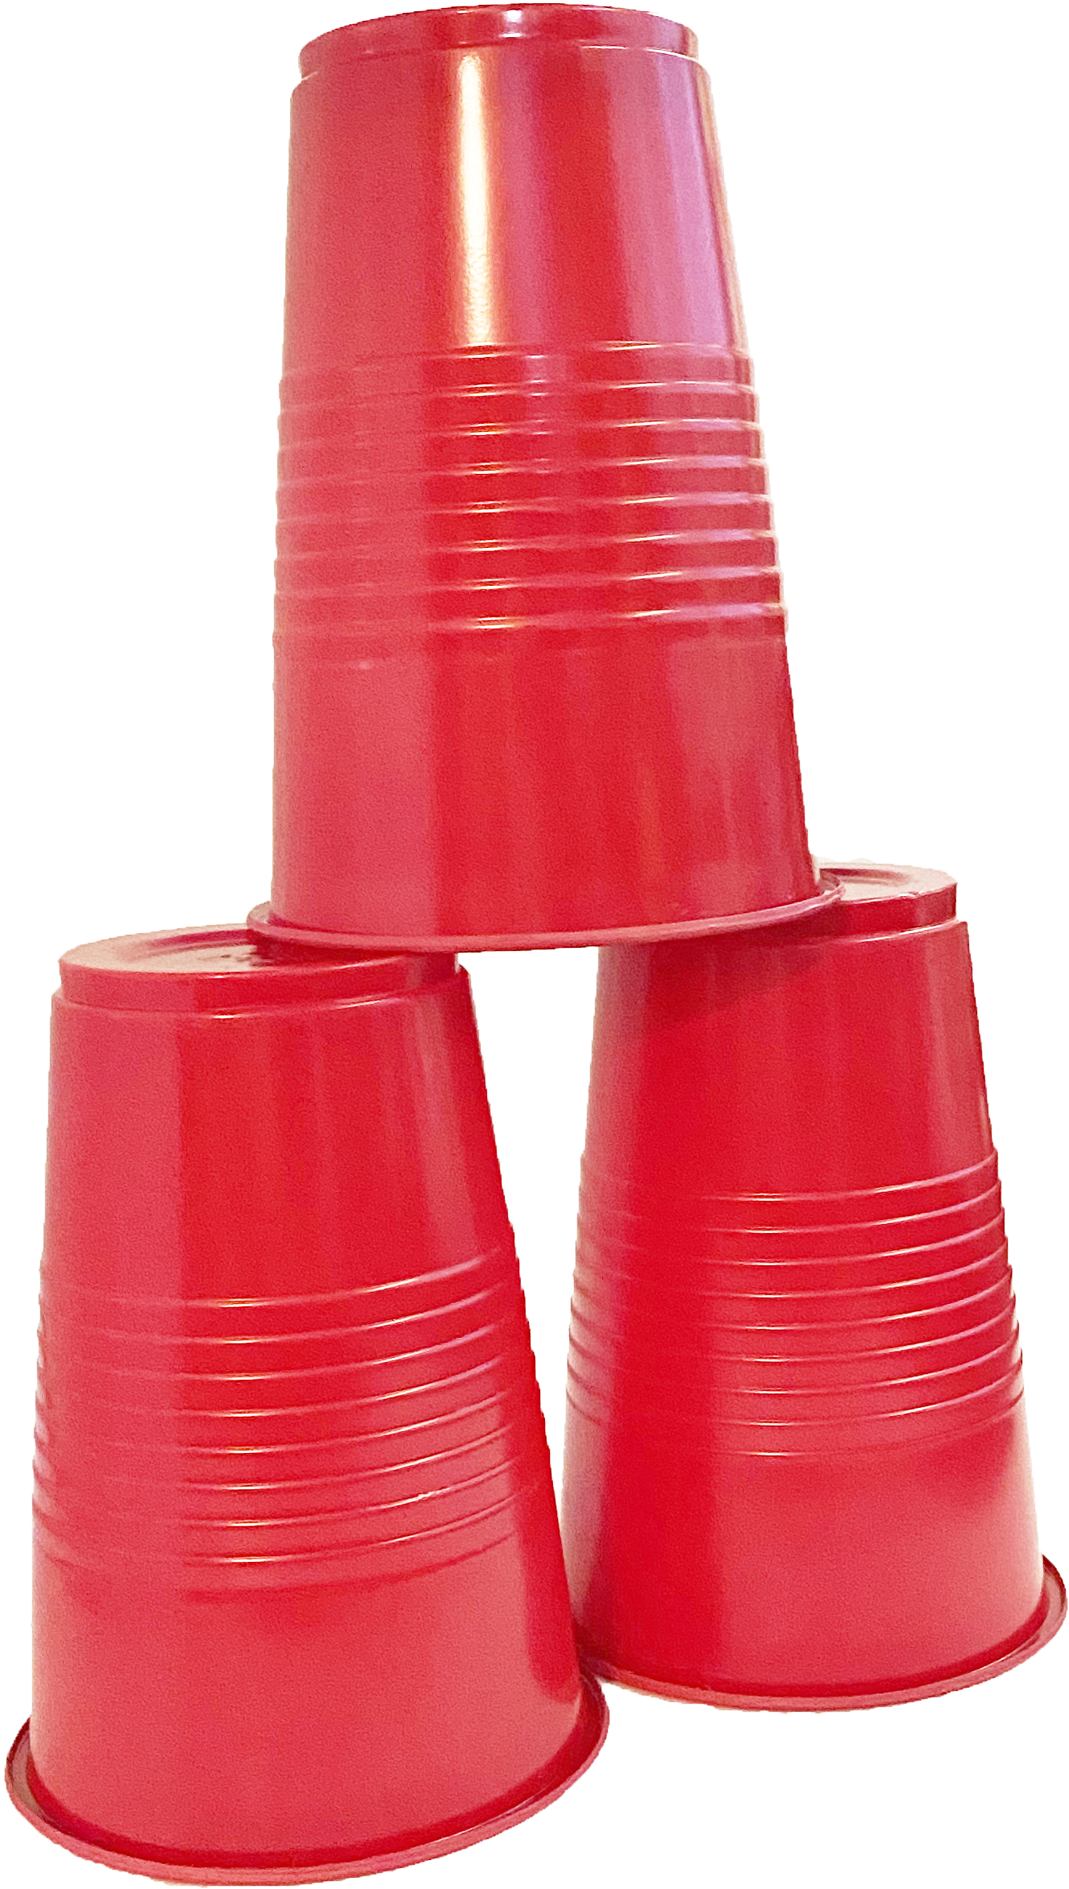 [600 PACK] 16 Oz Red Plastic Cups - Red Disposable Plastic Party Cups Crack  Resistant - Great for Beer Pong, Tailgate, Birthday Parties, Gatherings,  Picnics - Disposable Bulk Party Cups, Birthday Cup 